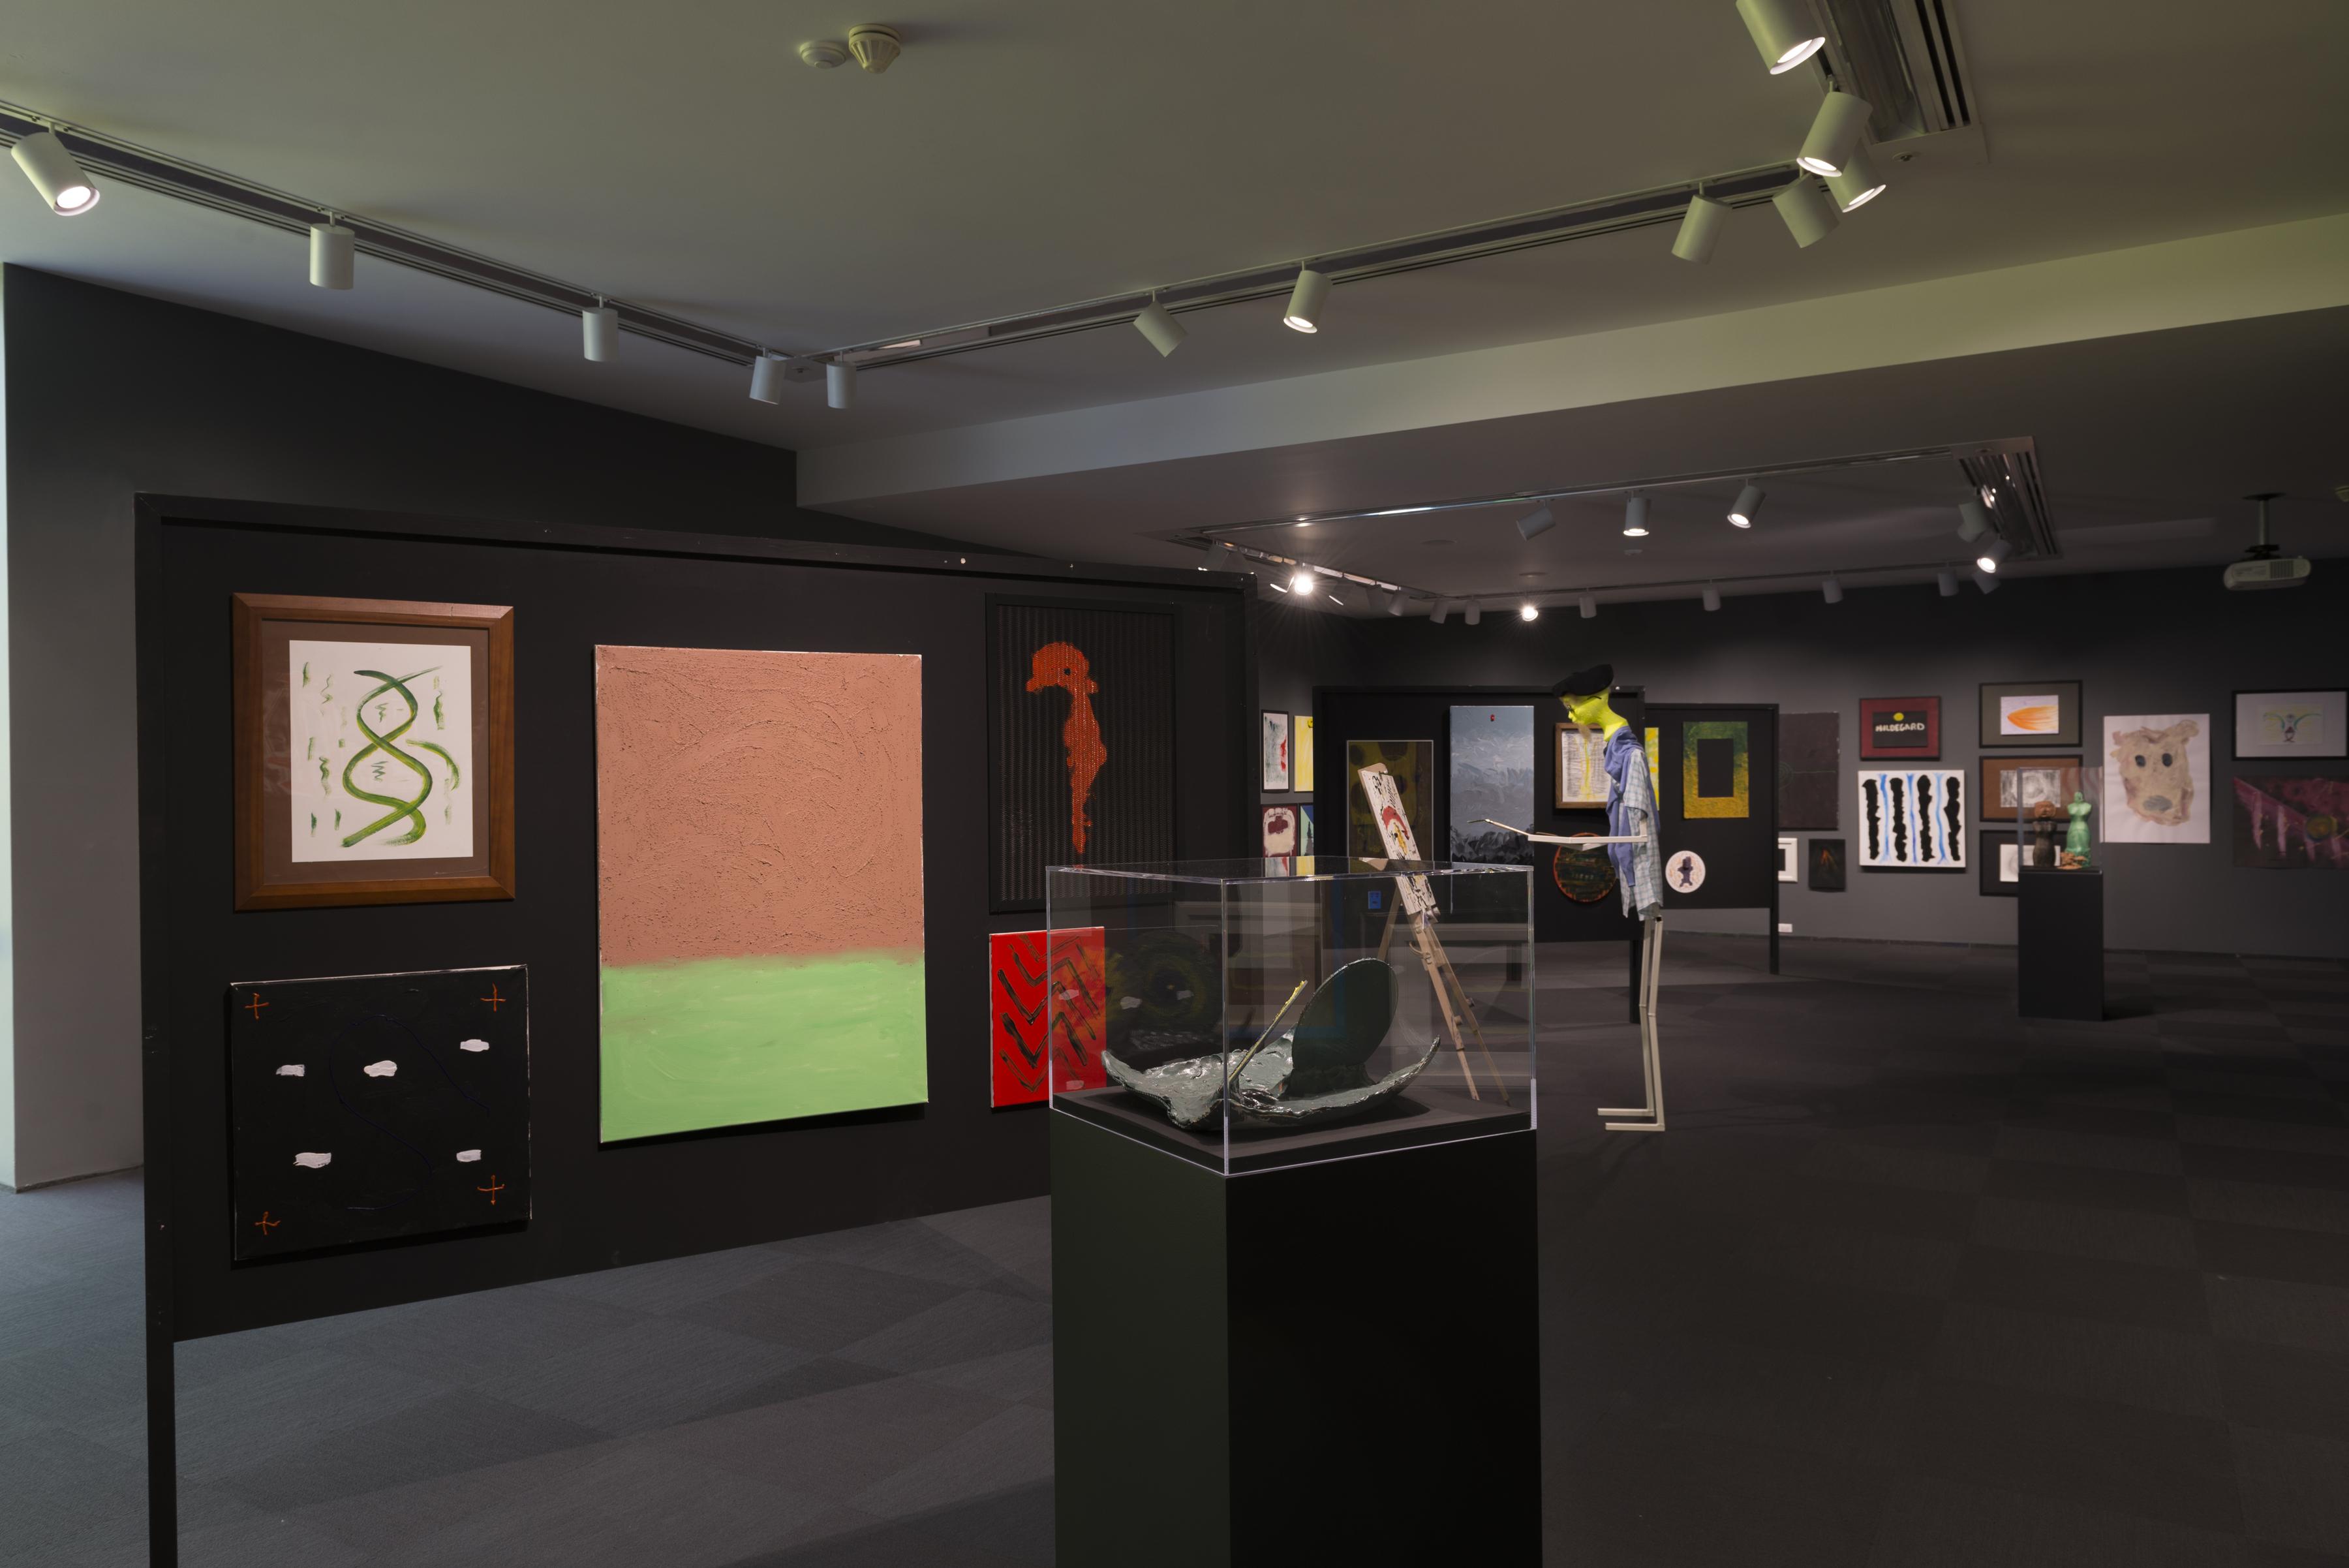 A humanoid figure with a yellow head stands in front of an easel and canvas in the middle of a dark grey gallery with paintings hung in clusters and sculptures on pedestals.